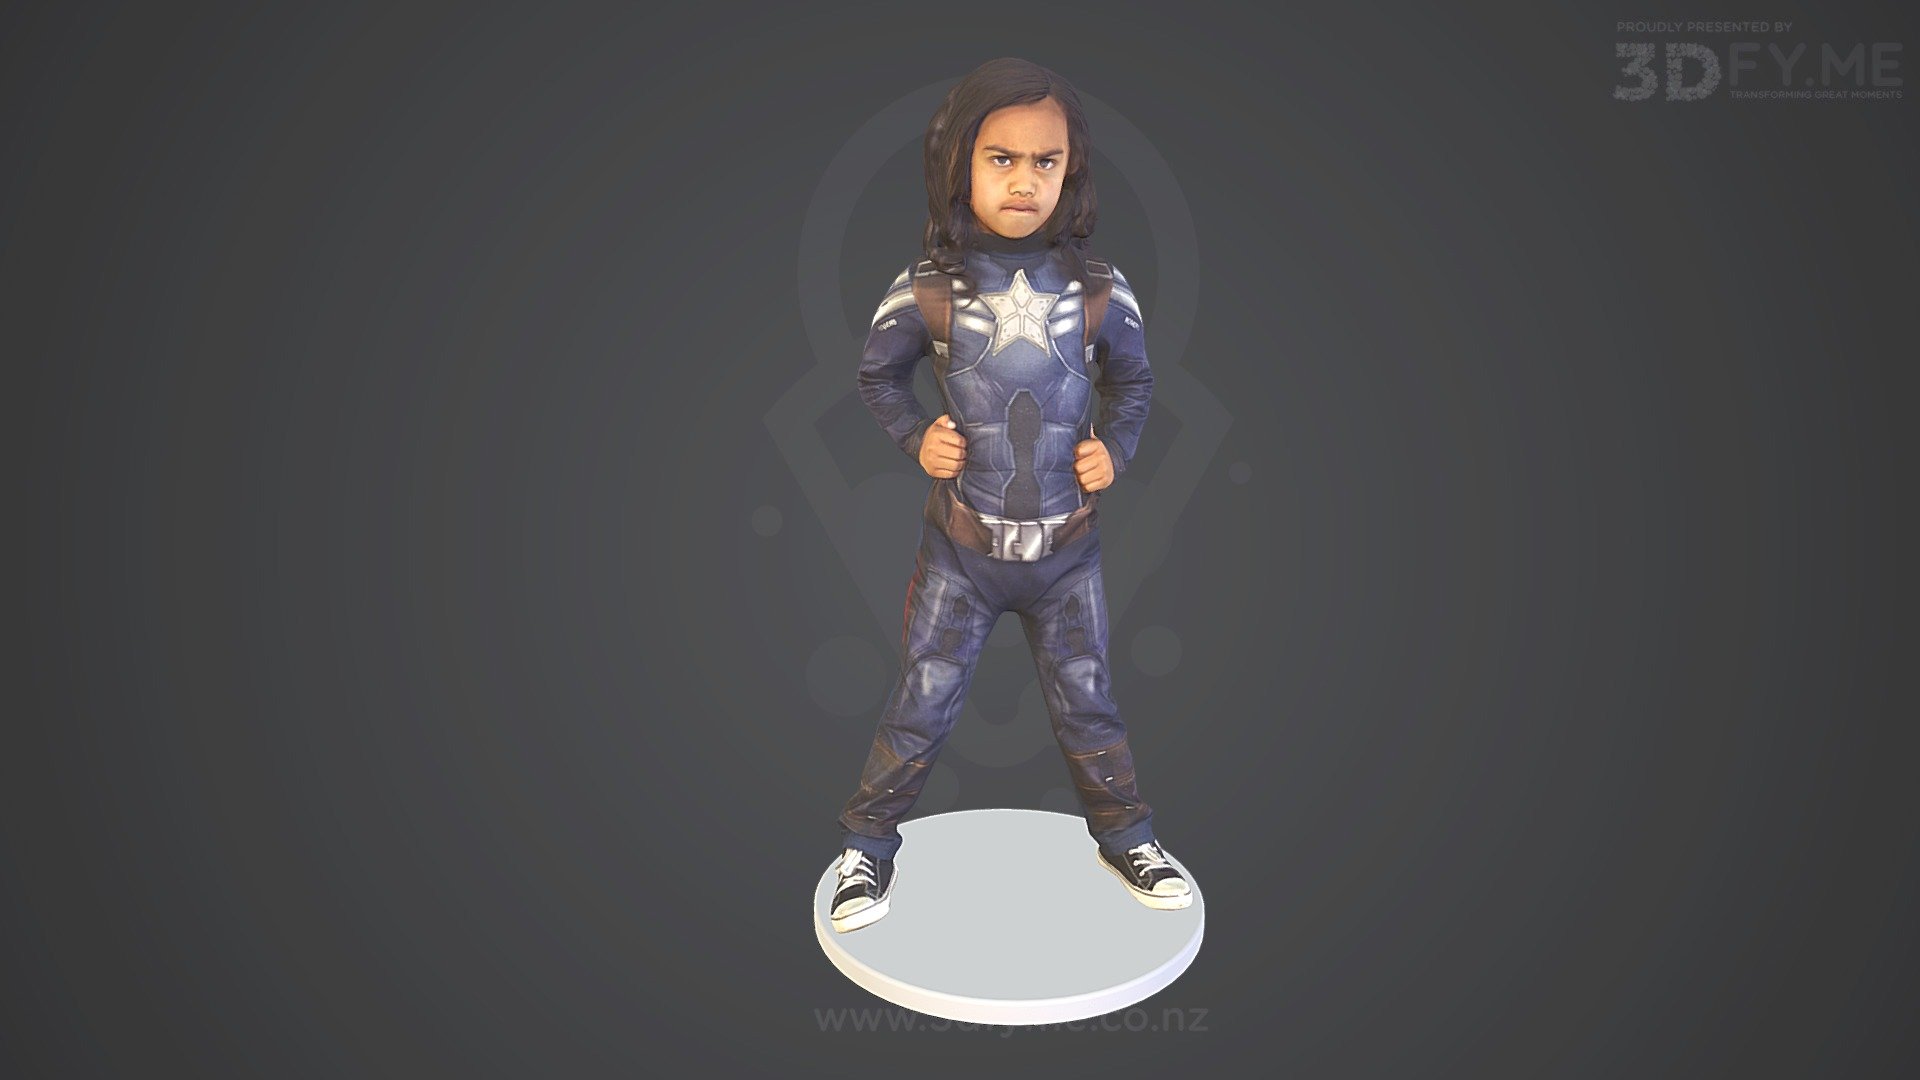 We love to 3D-scan kids - especially if there are as confident and ready to lead as this little fellow - a born conqueror :)

Get your own gorgeous 3D-Scan at https://3dfyme.co.nz 3d model